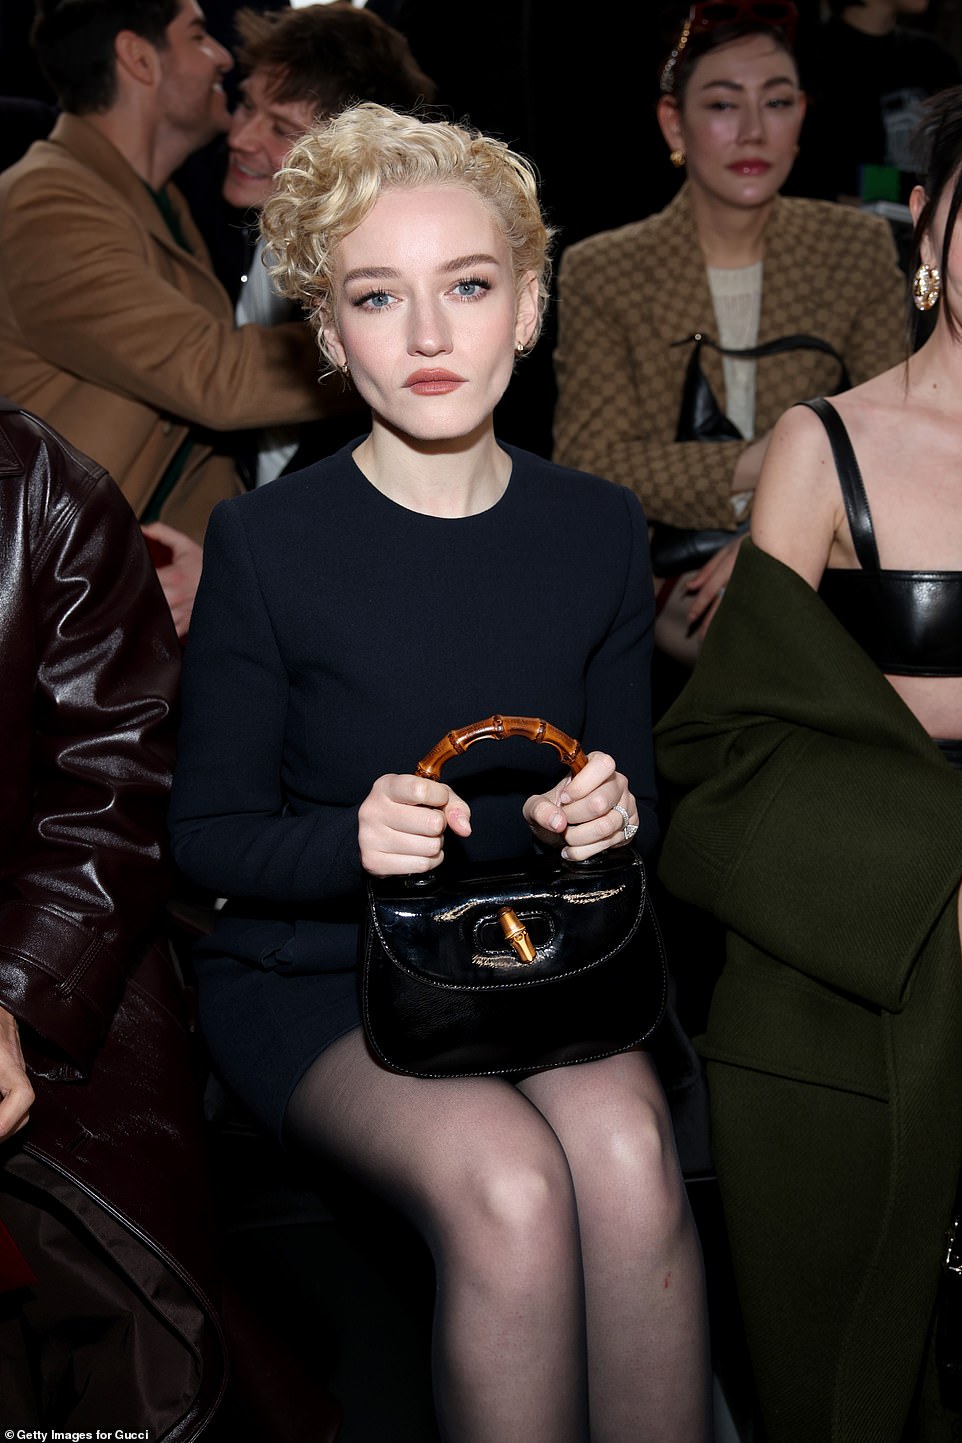 Julie carried her essentials in a small black clutch bag which had a wooden handle